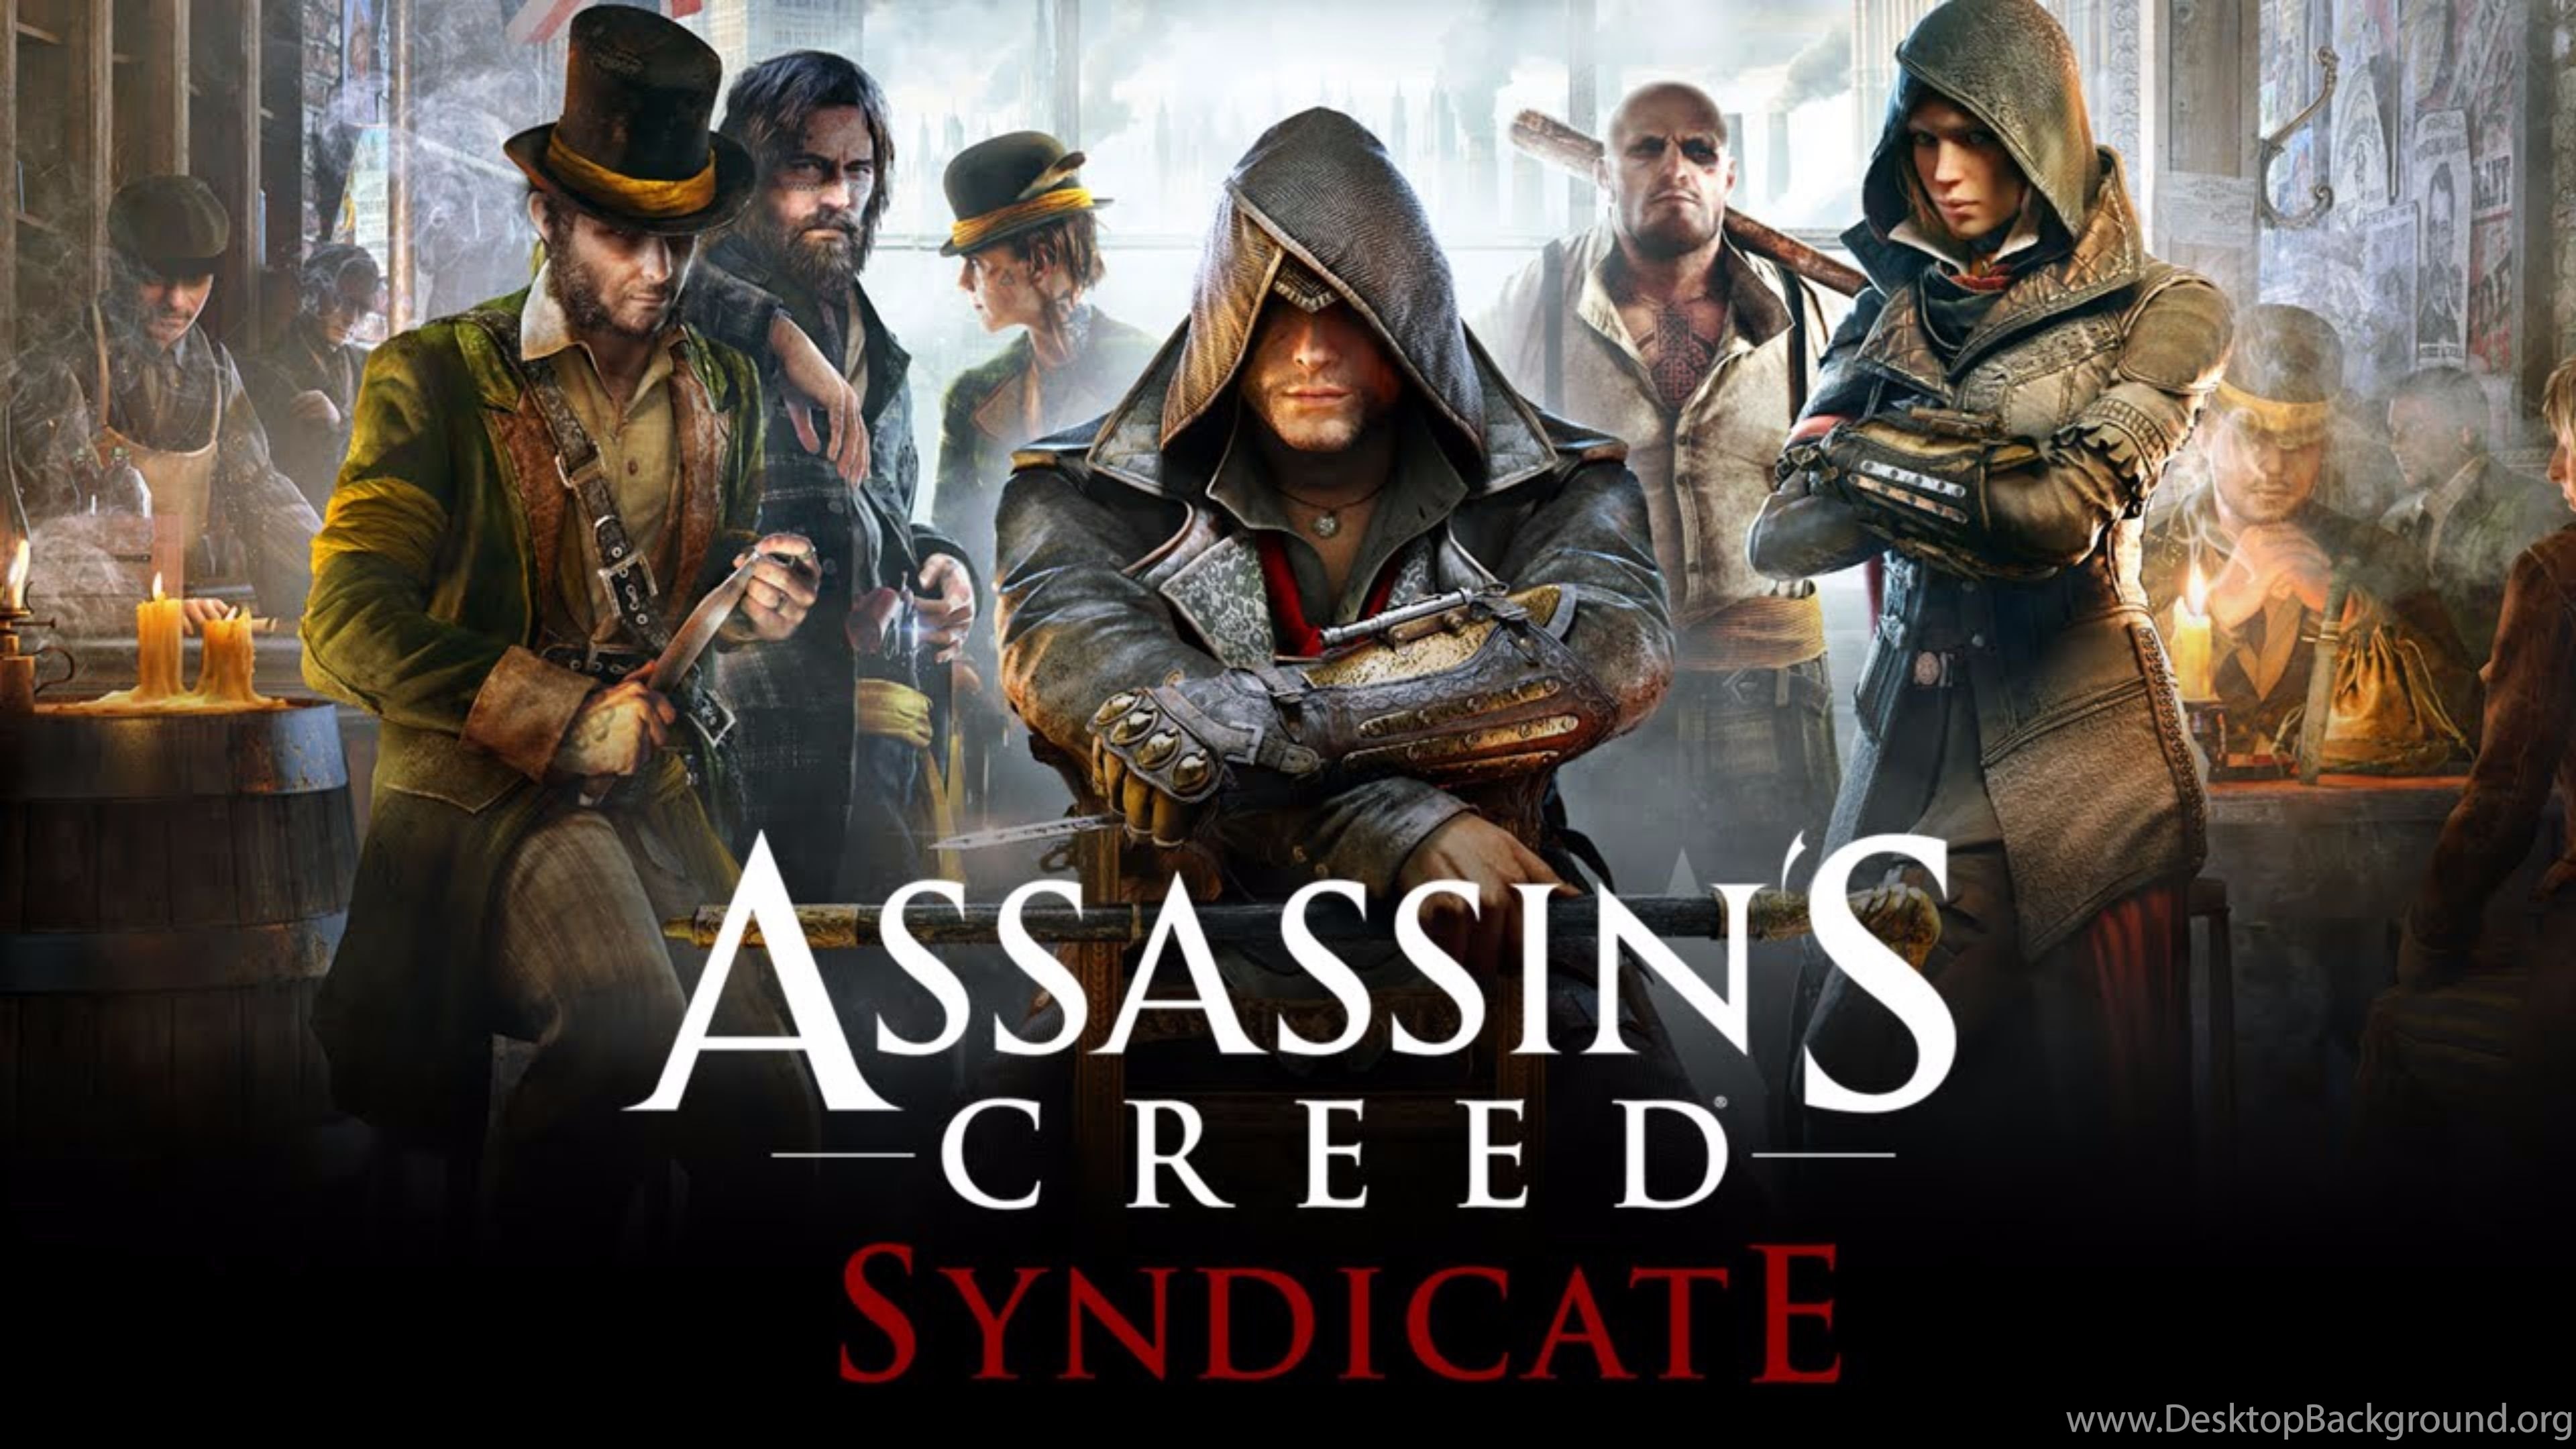 Download Free Assassins Creed Syndicate 4k Wallpapers Desktop